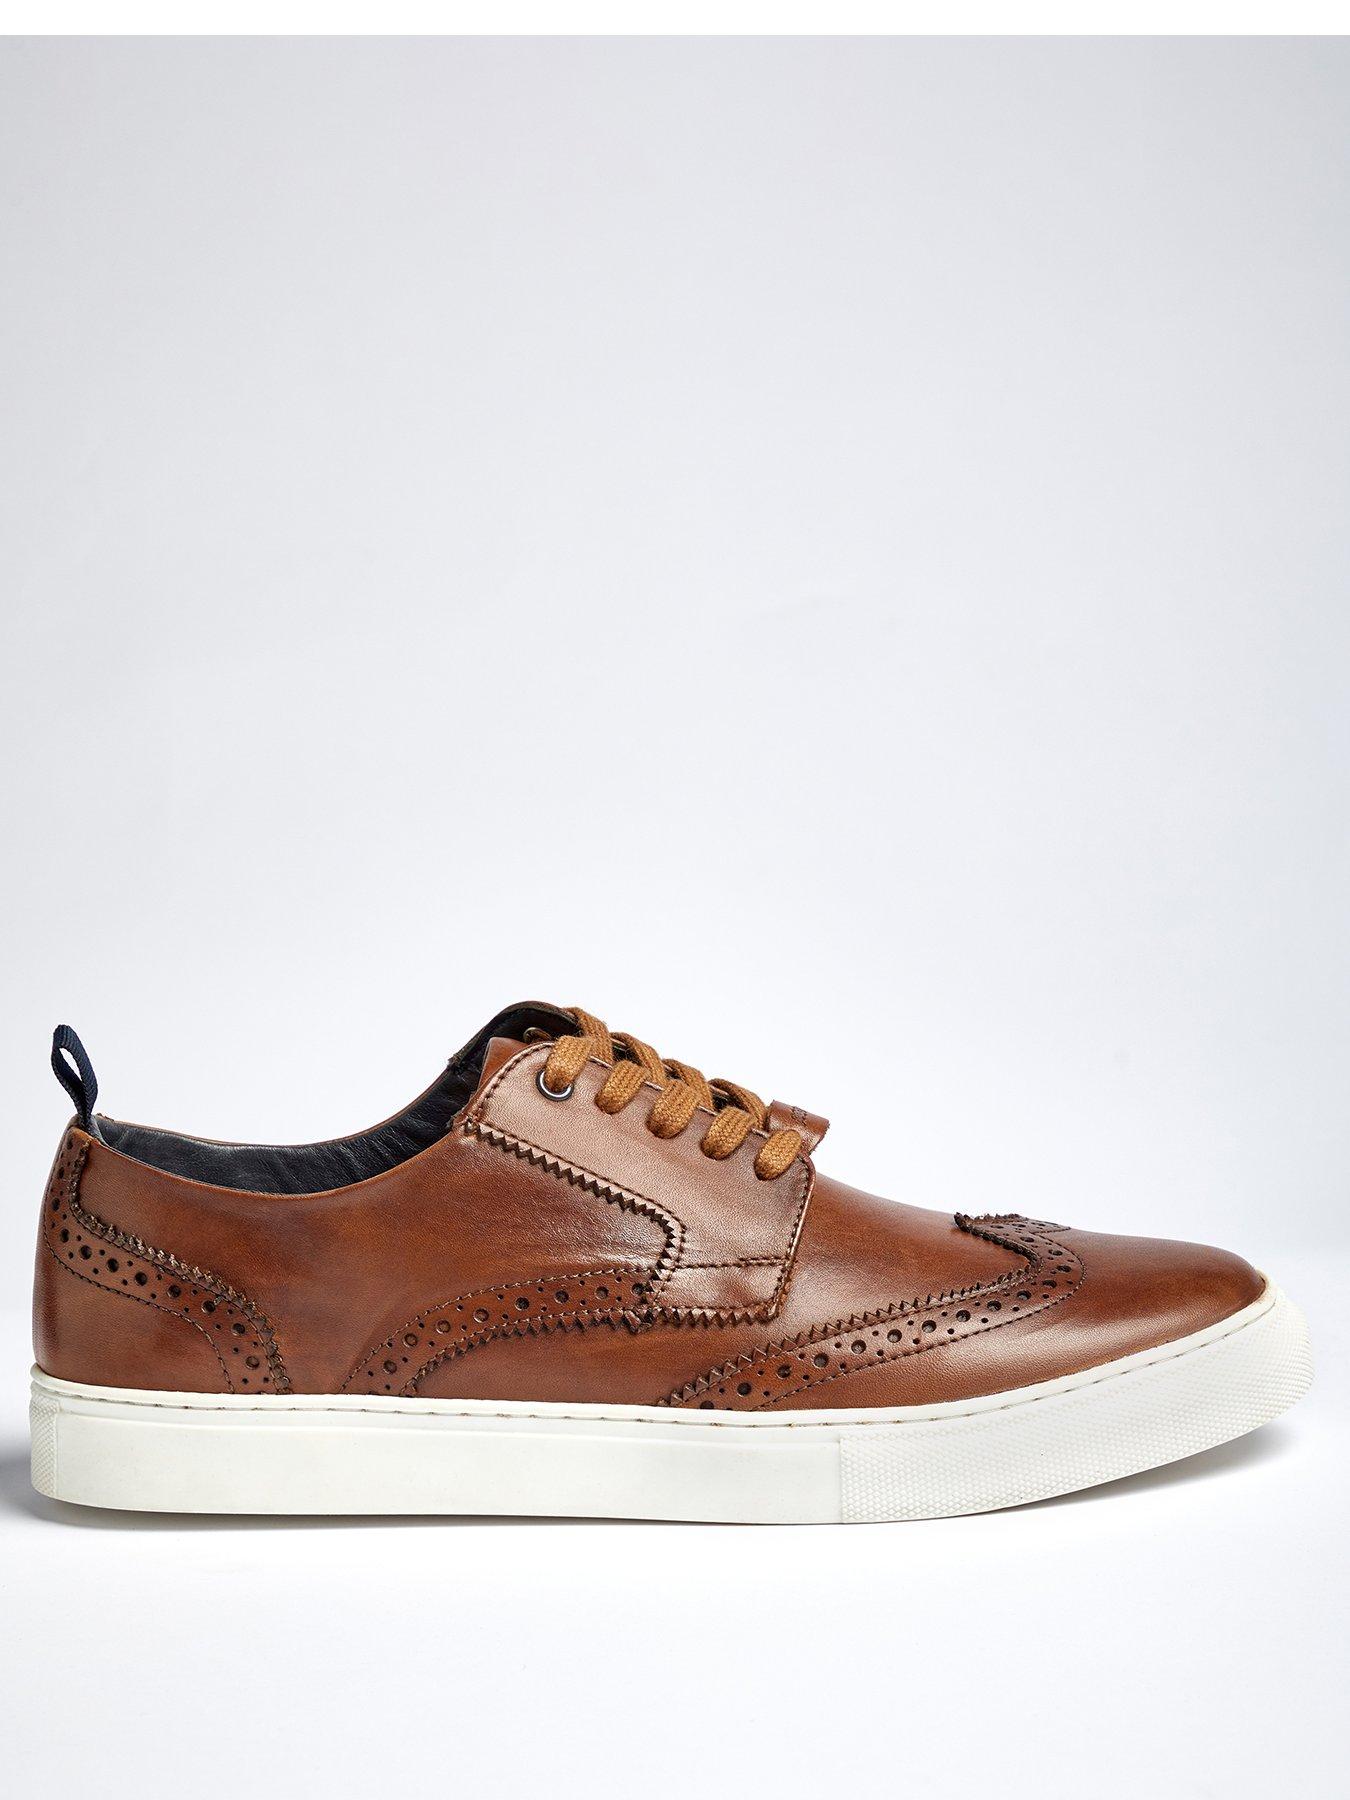  Foley Leather Lace Up Brogue Trainer - Chestnut